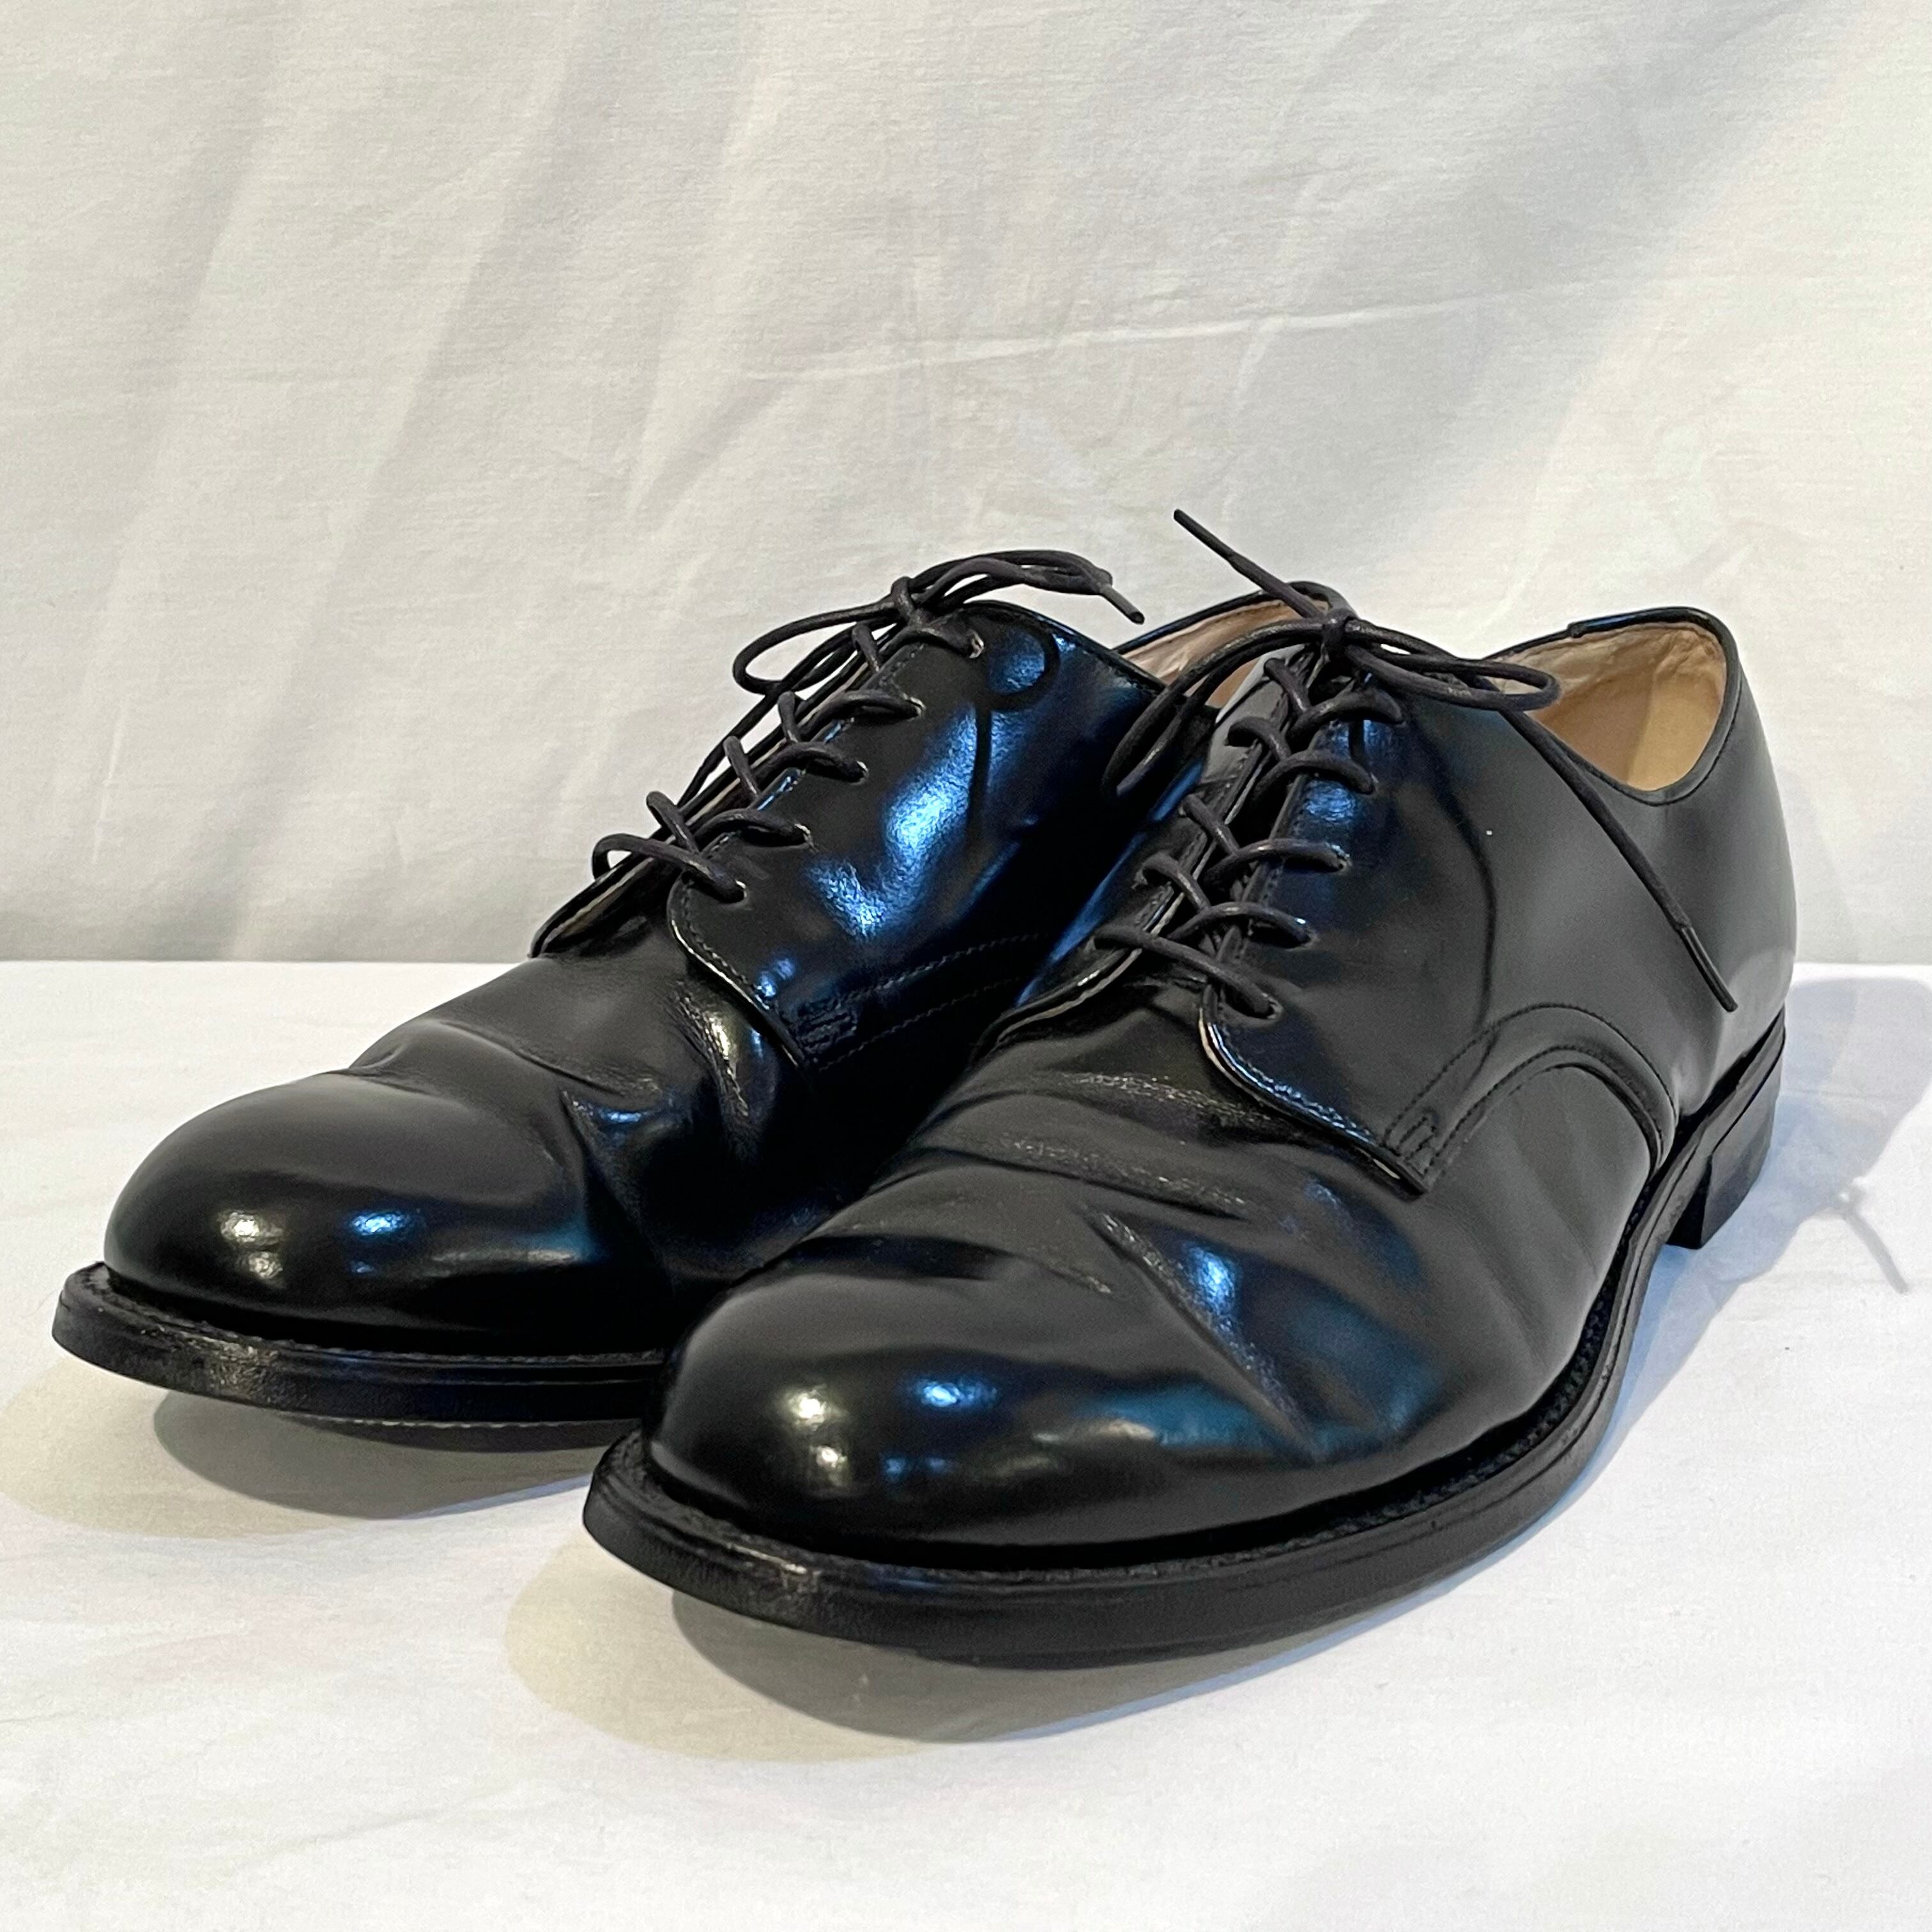 80's U.S.Navy service shoes アメリカ軍 サービスシューズ